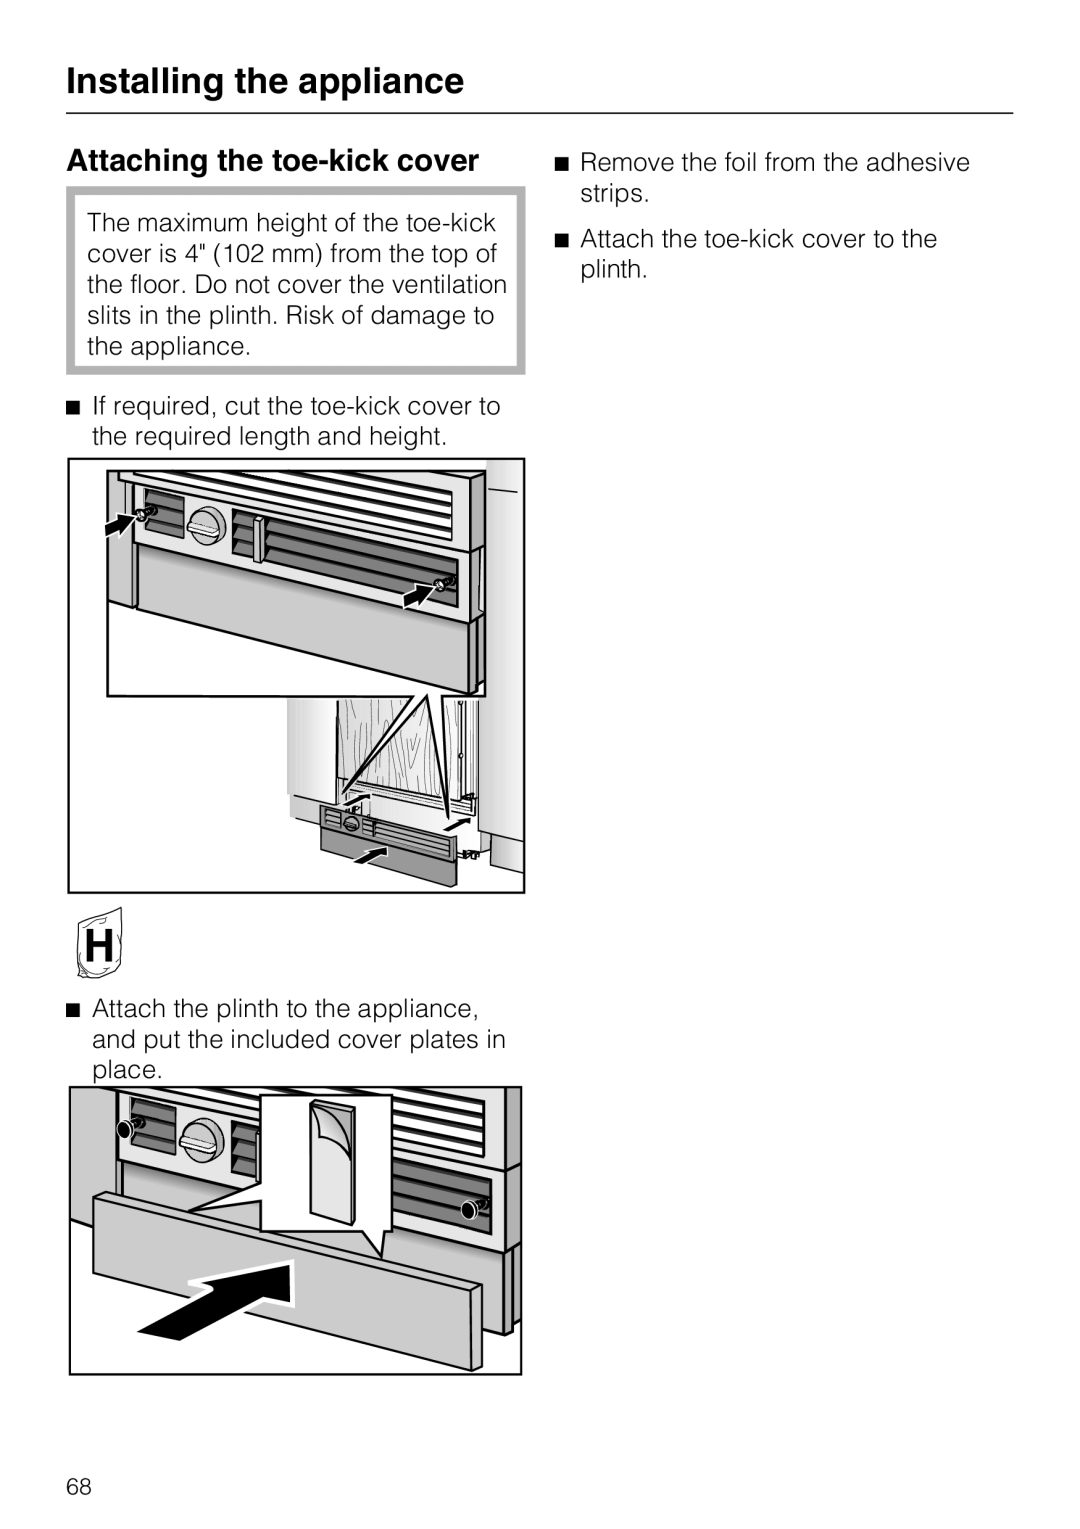 Miele F 1411 Vi installation instructions Attaching the toe-kickcover, Installing the appliance 